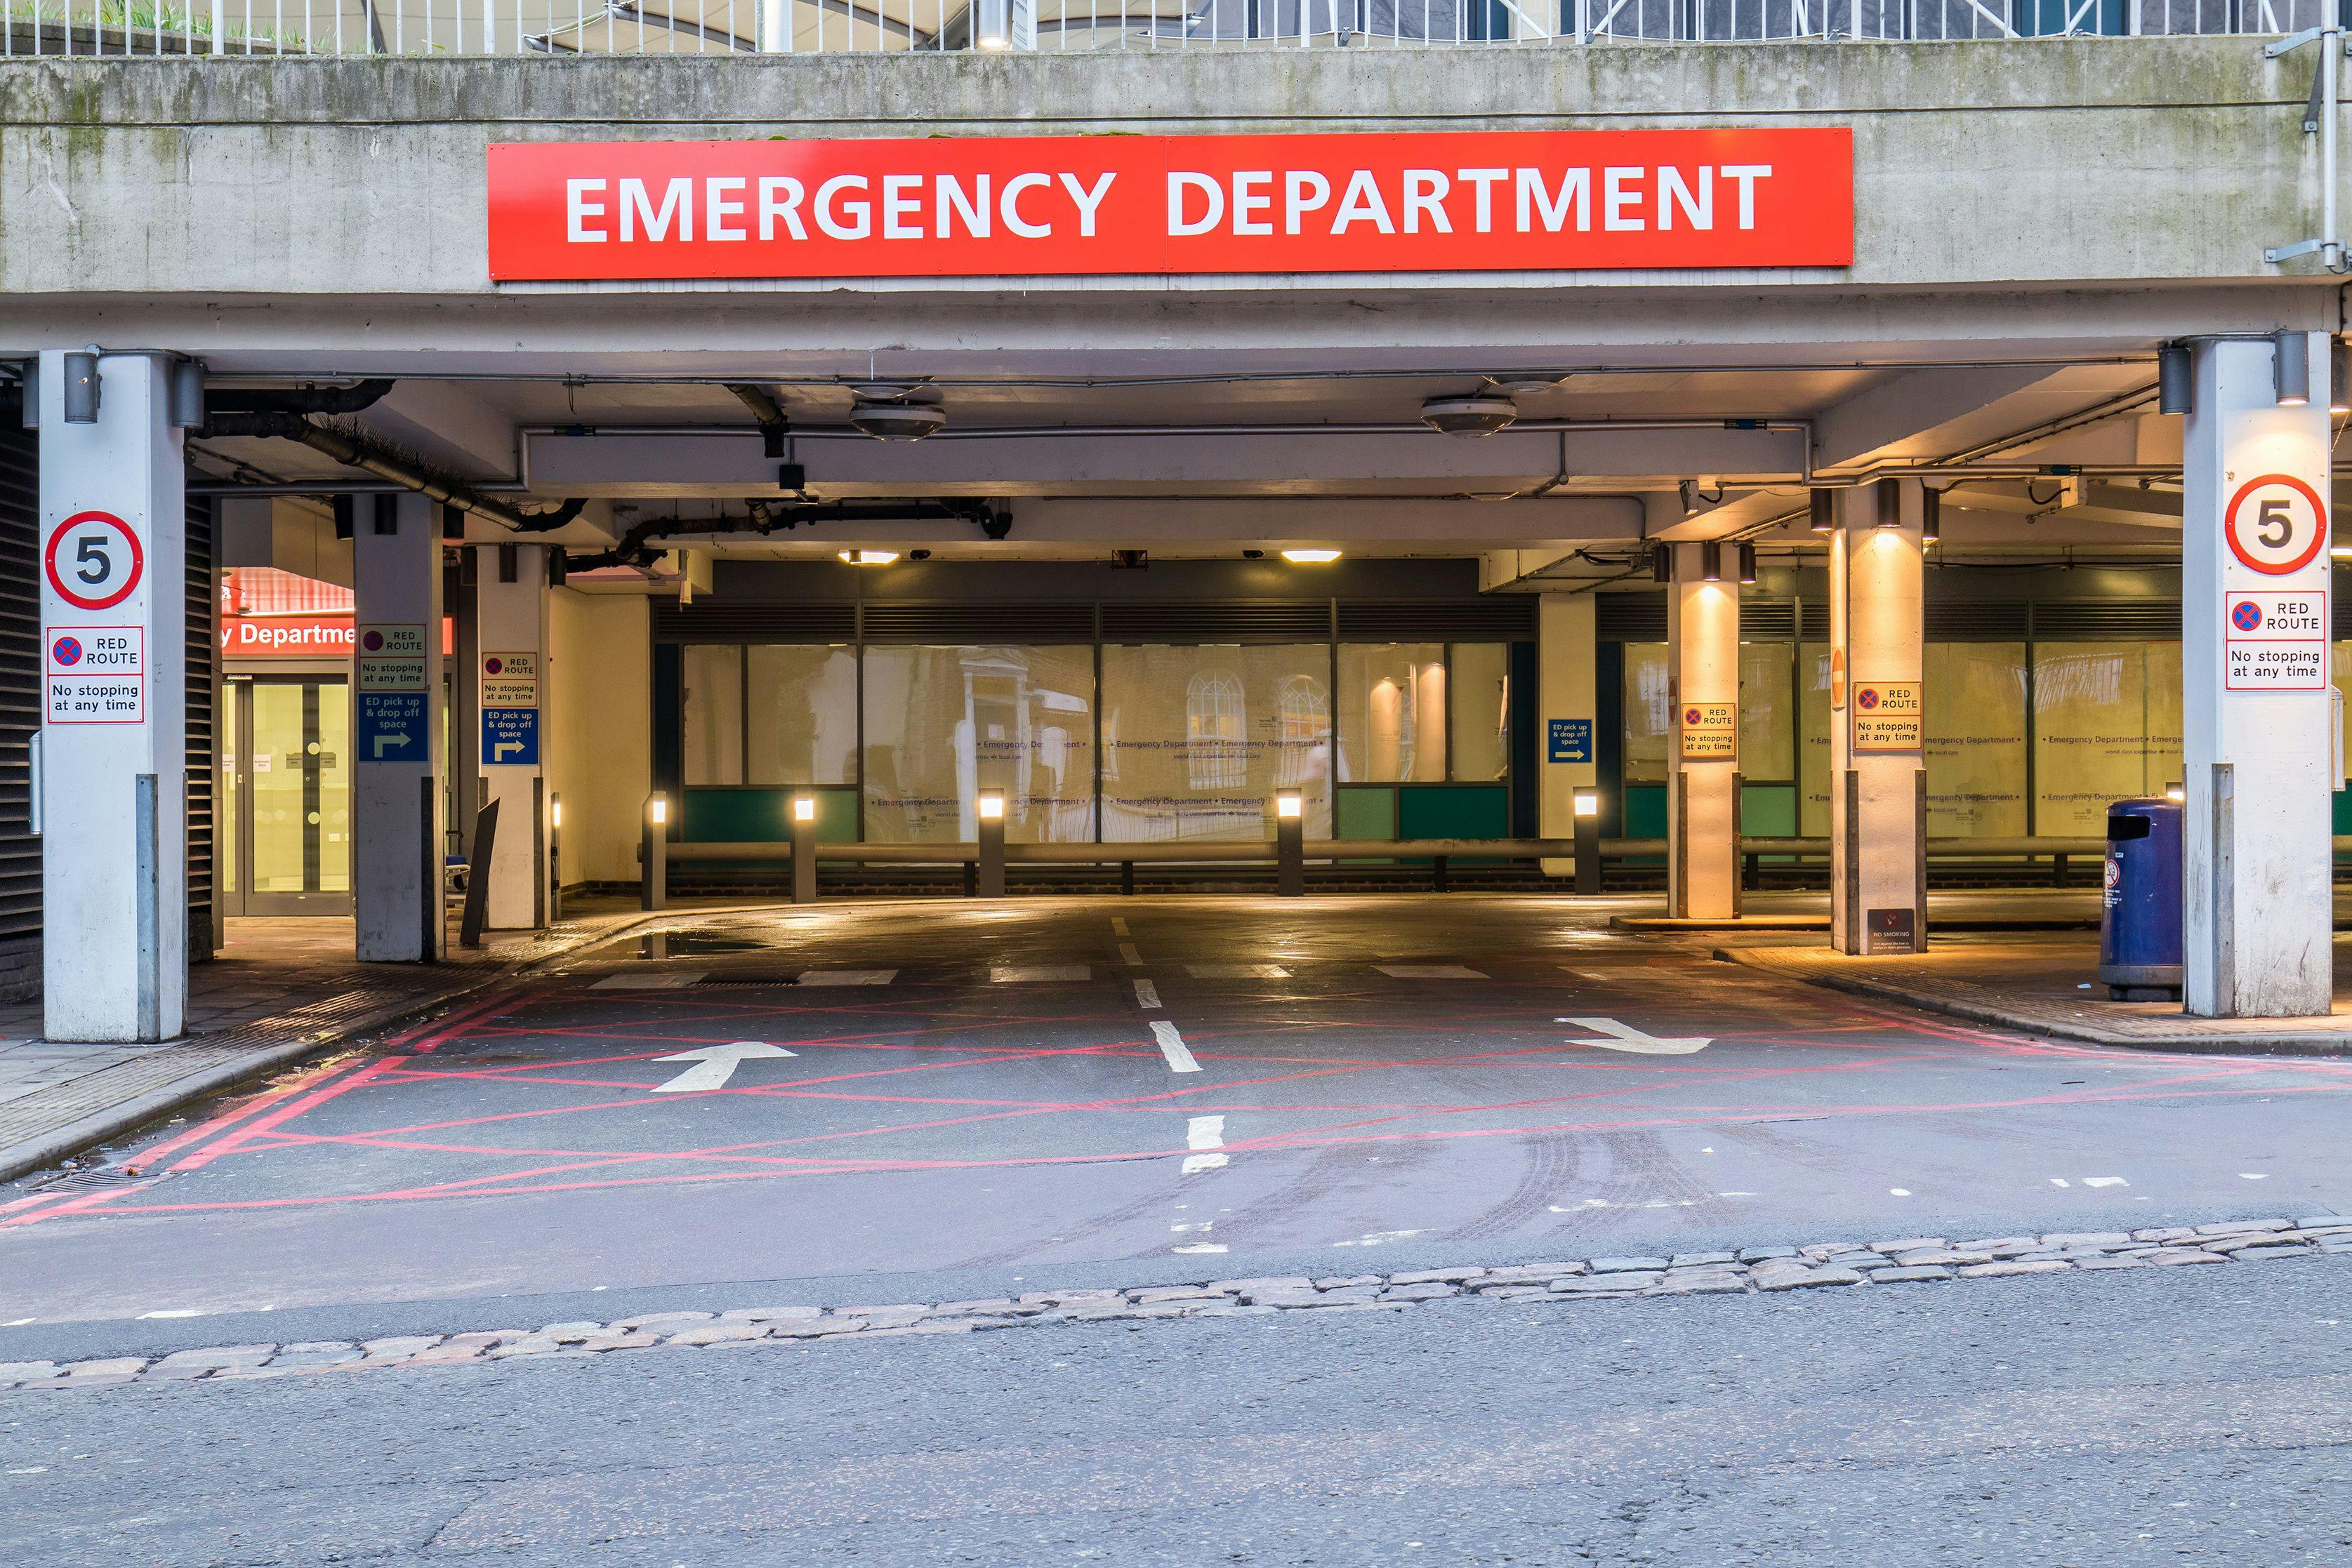 Making the emergency department utilization, SDOH connection